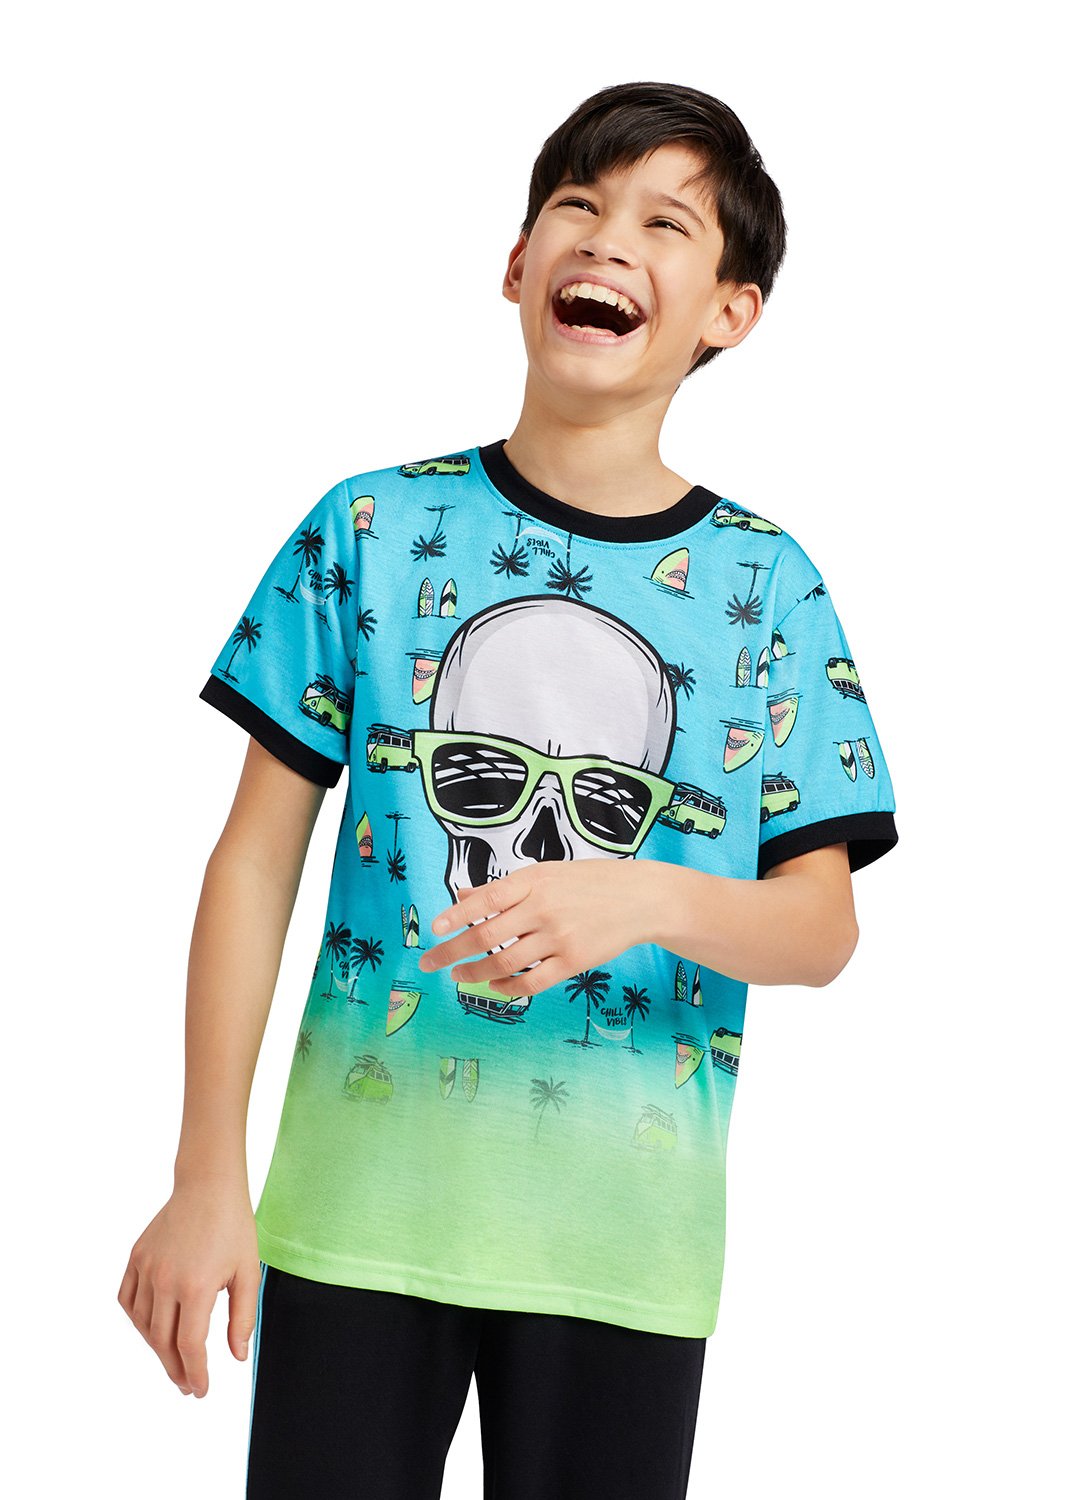 Boy smiling with Skull Print Top